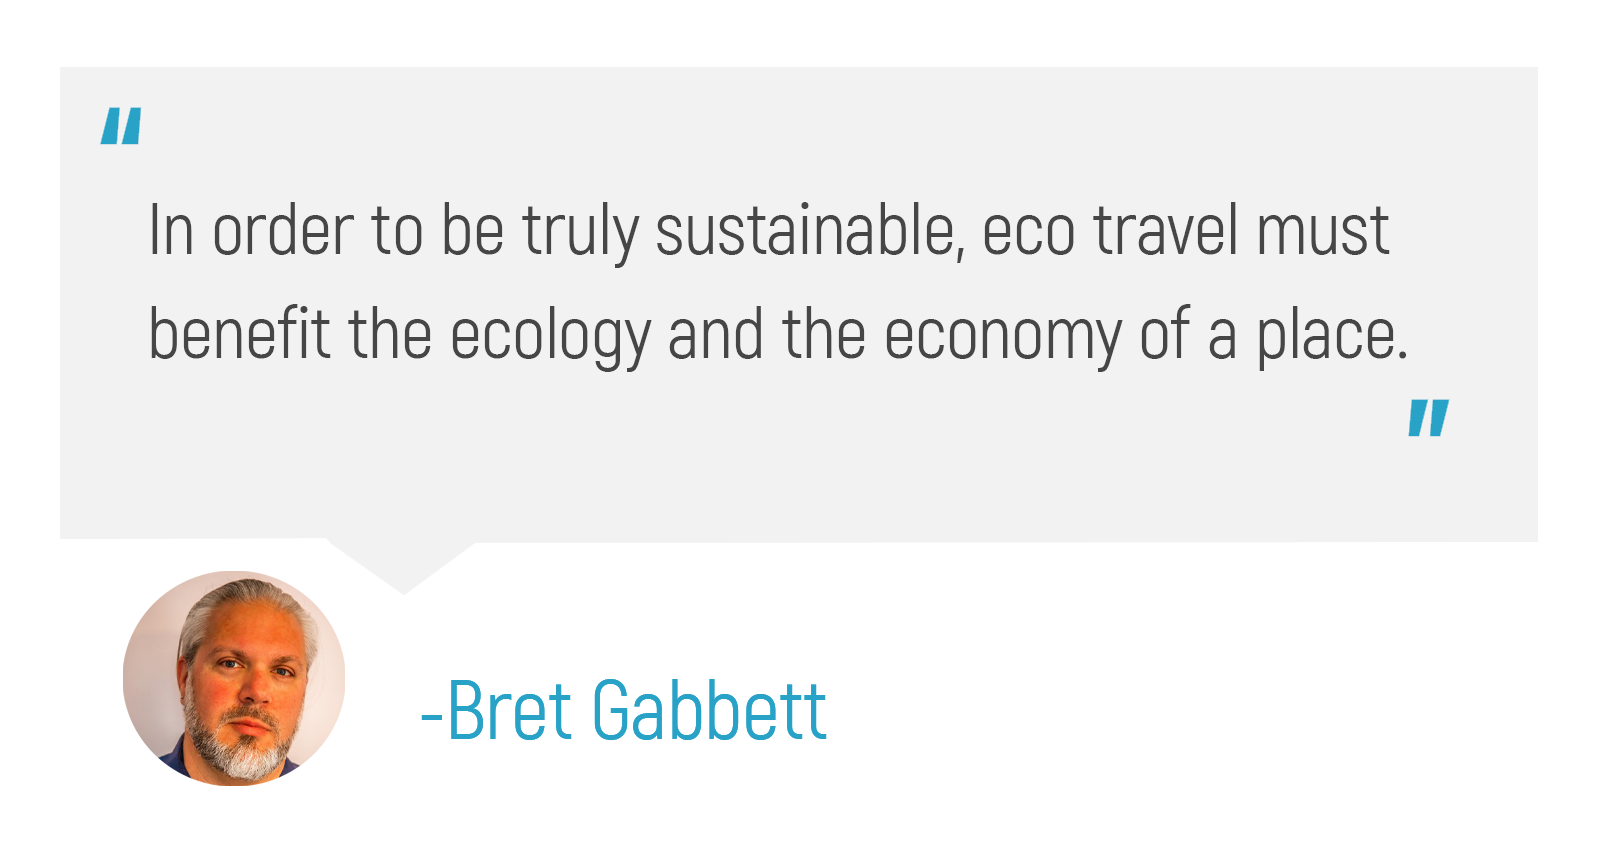 "In order to be truly sustainable, eco travel must benefit the ecology and the economy of a place."